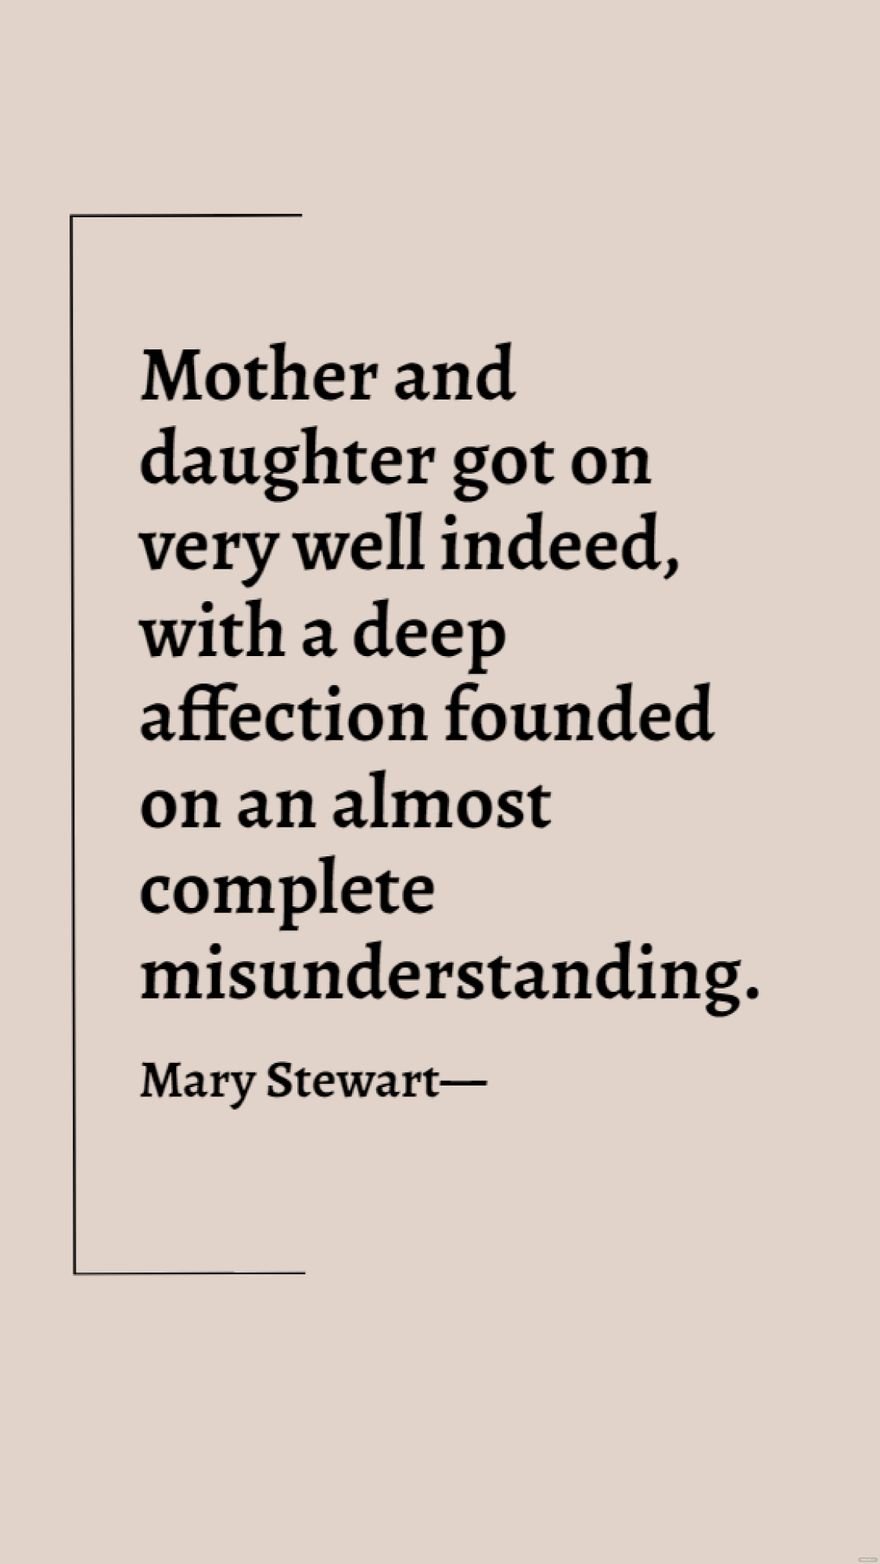 Mary Stewart - Mother and daughter got on very well indeed, with a deep affection founded on an almost complete misunderstanding.